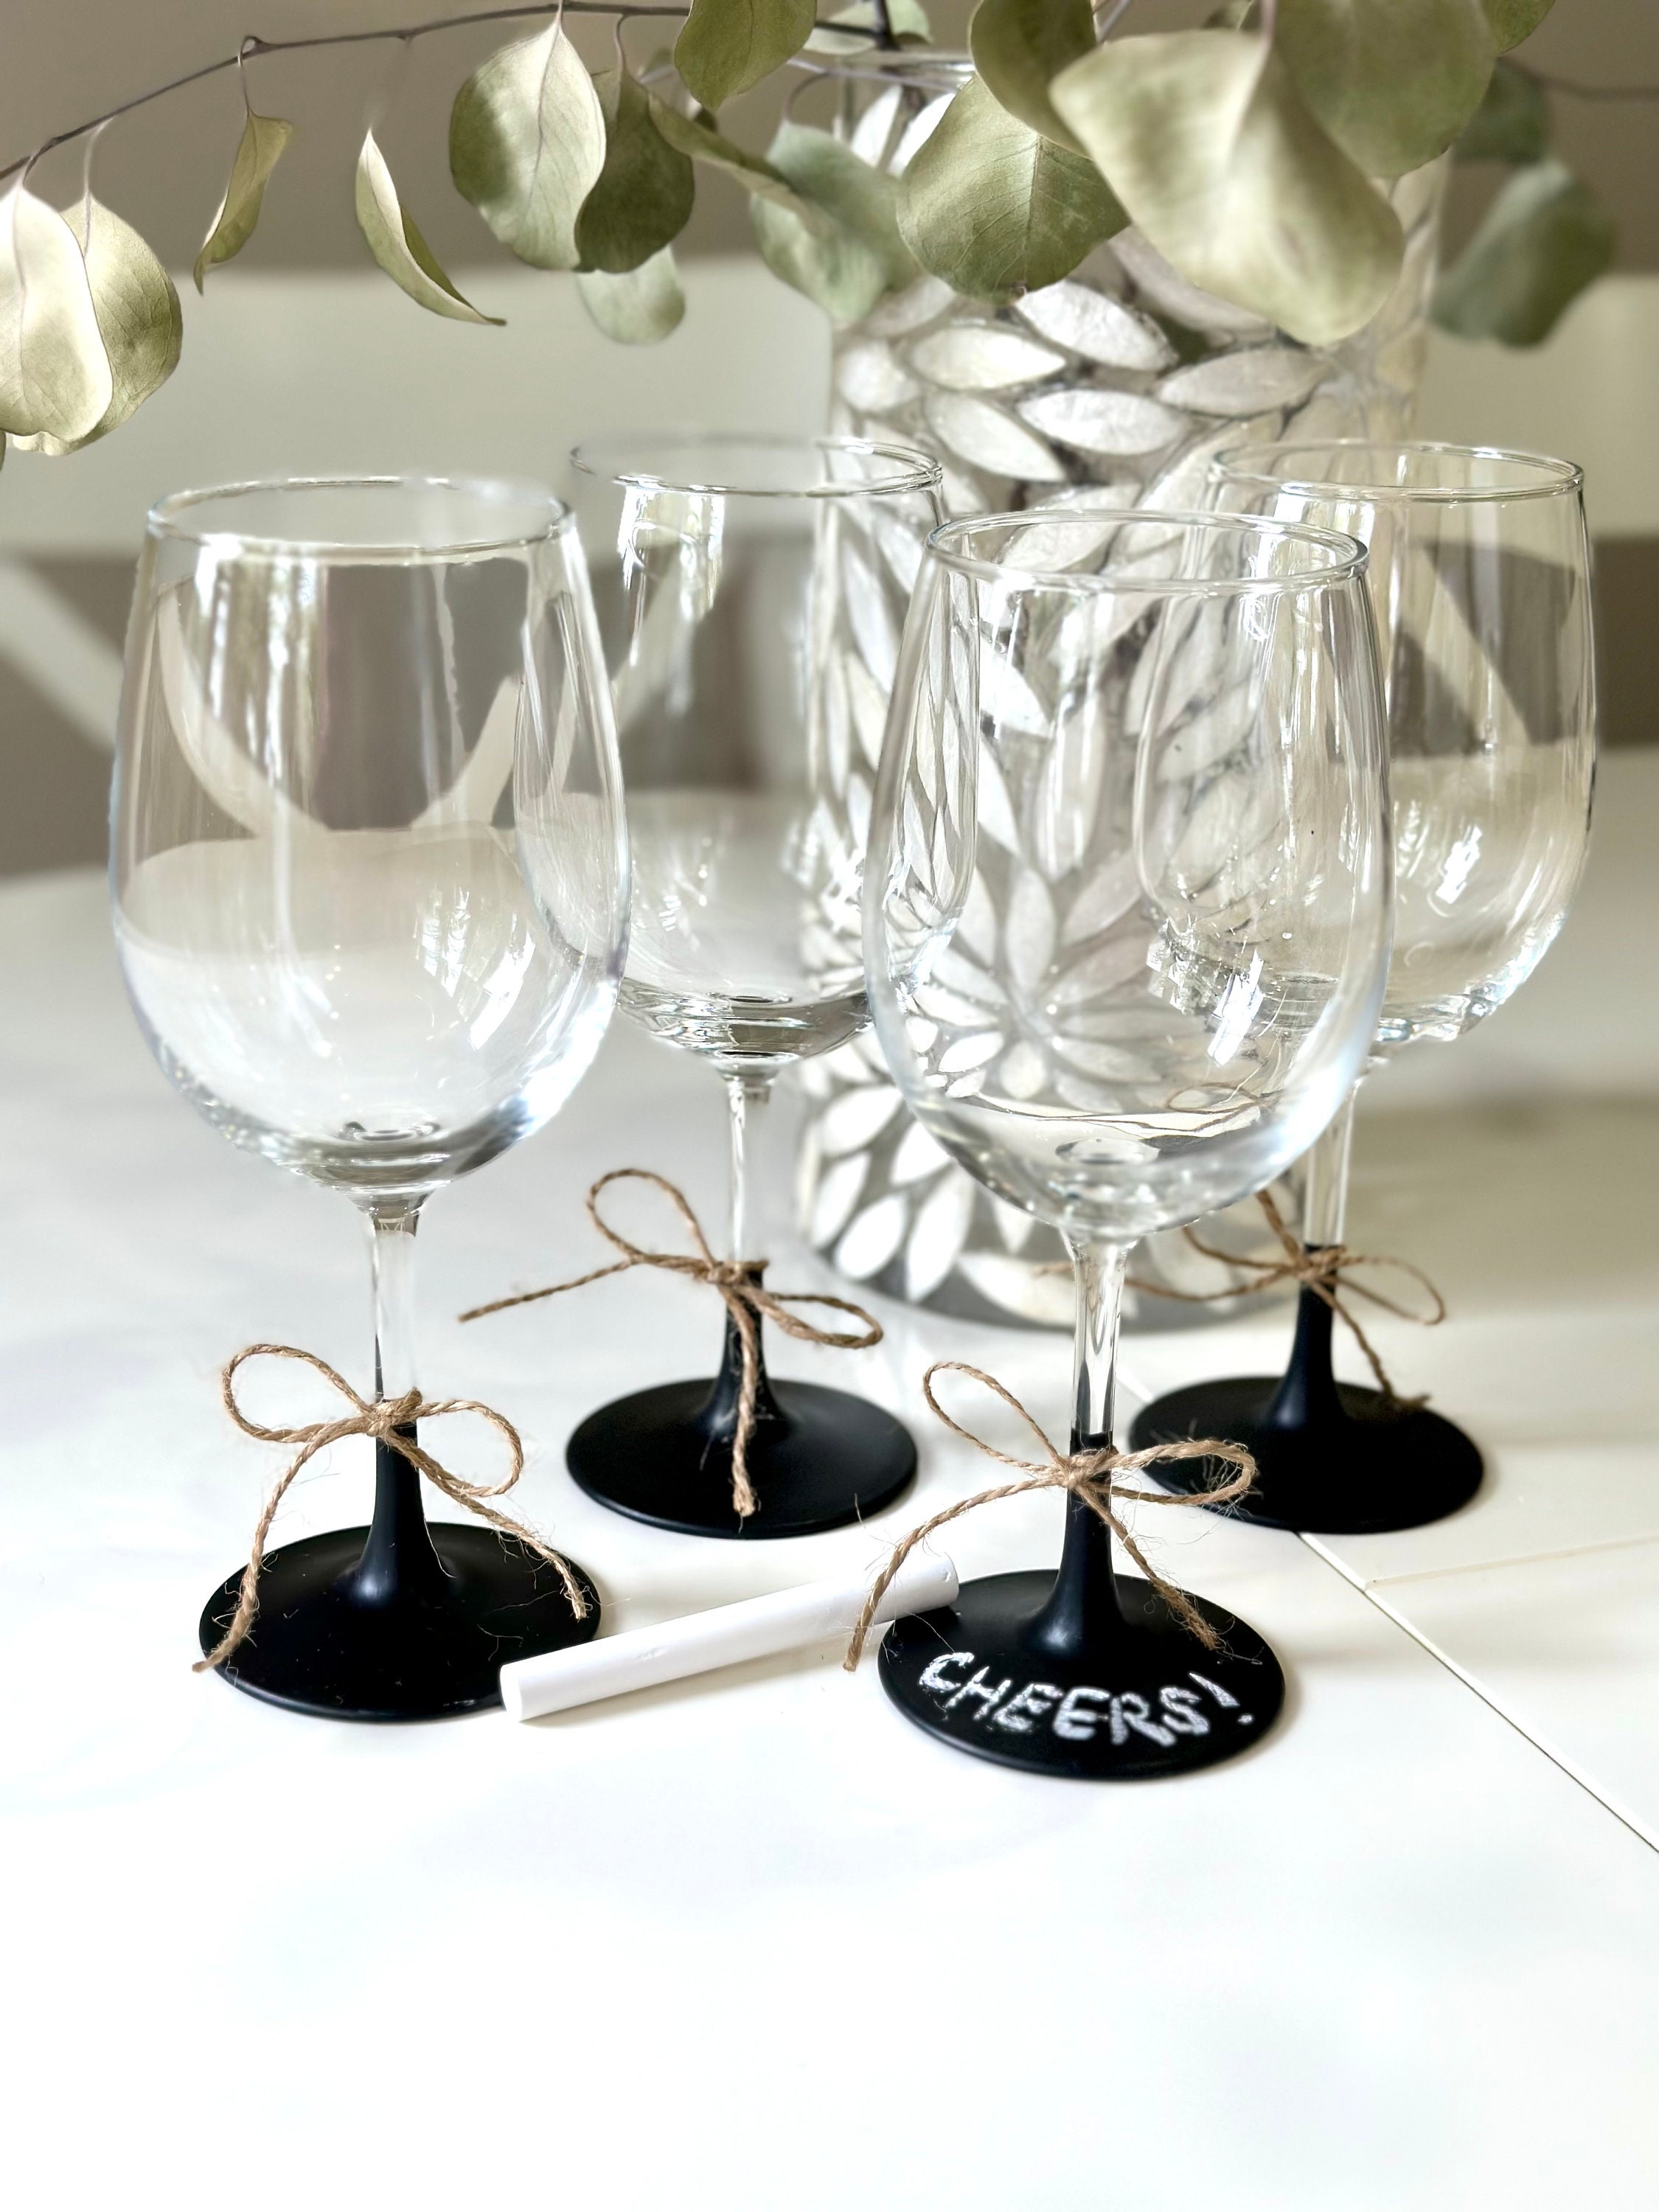 11 Unique, Artisanal Wine Glasses for Sipping Pretty